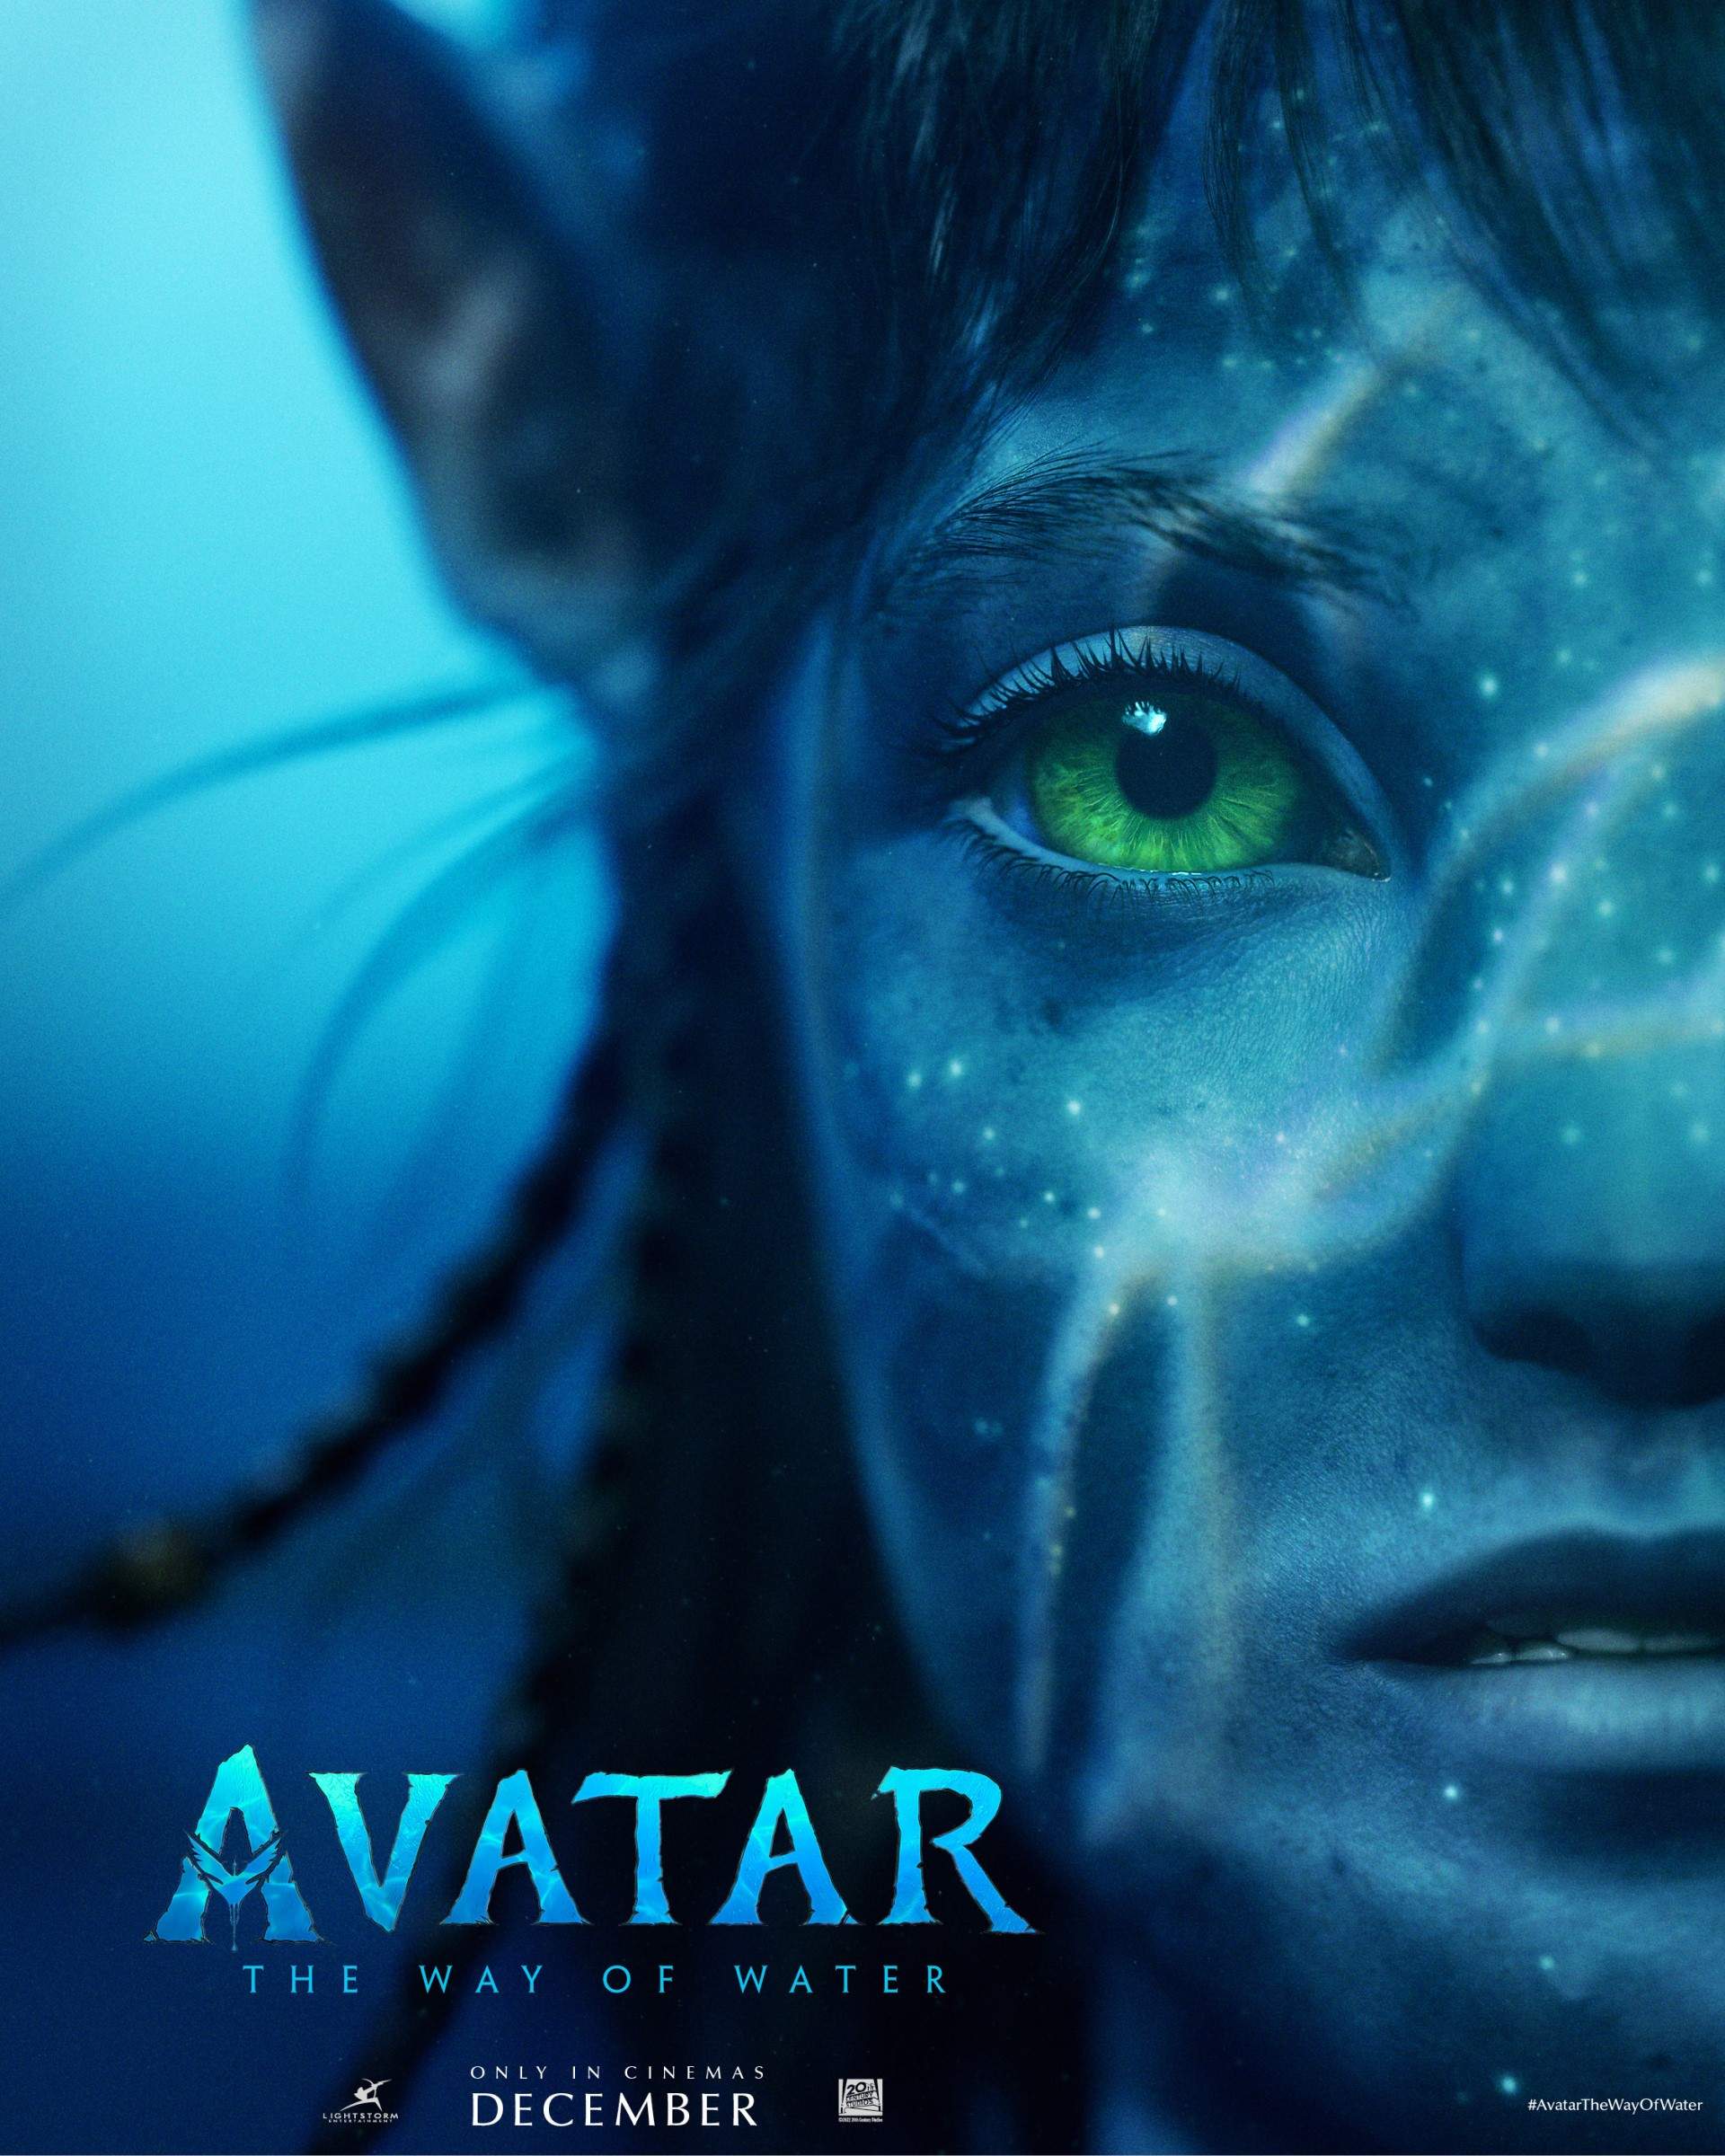 Whos who in Avatar 2 The Way of Water  EWcom